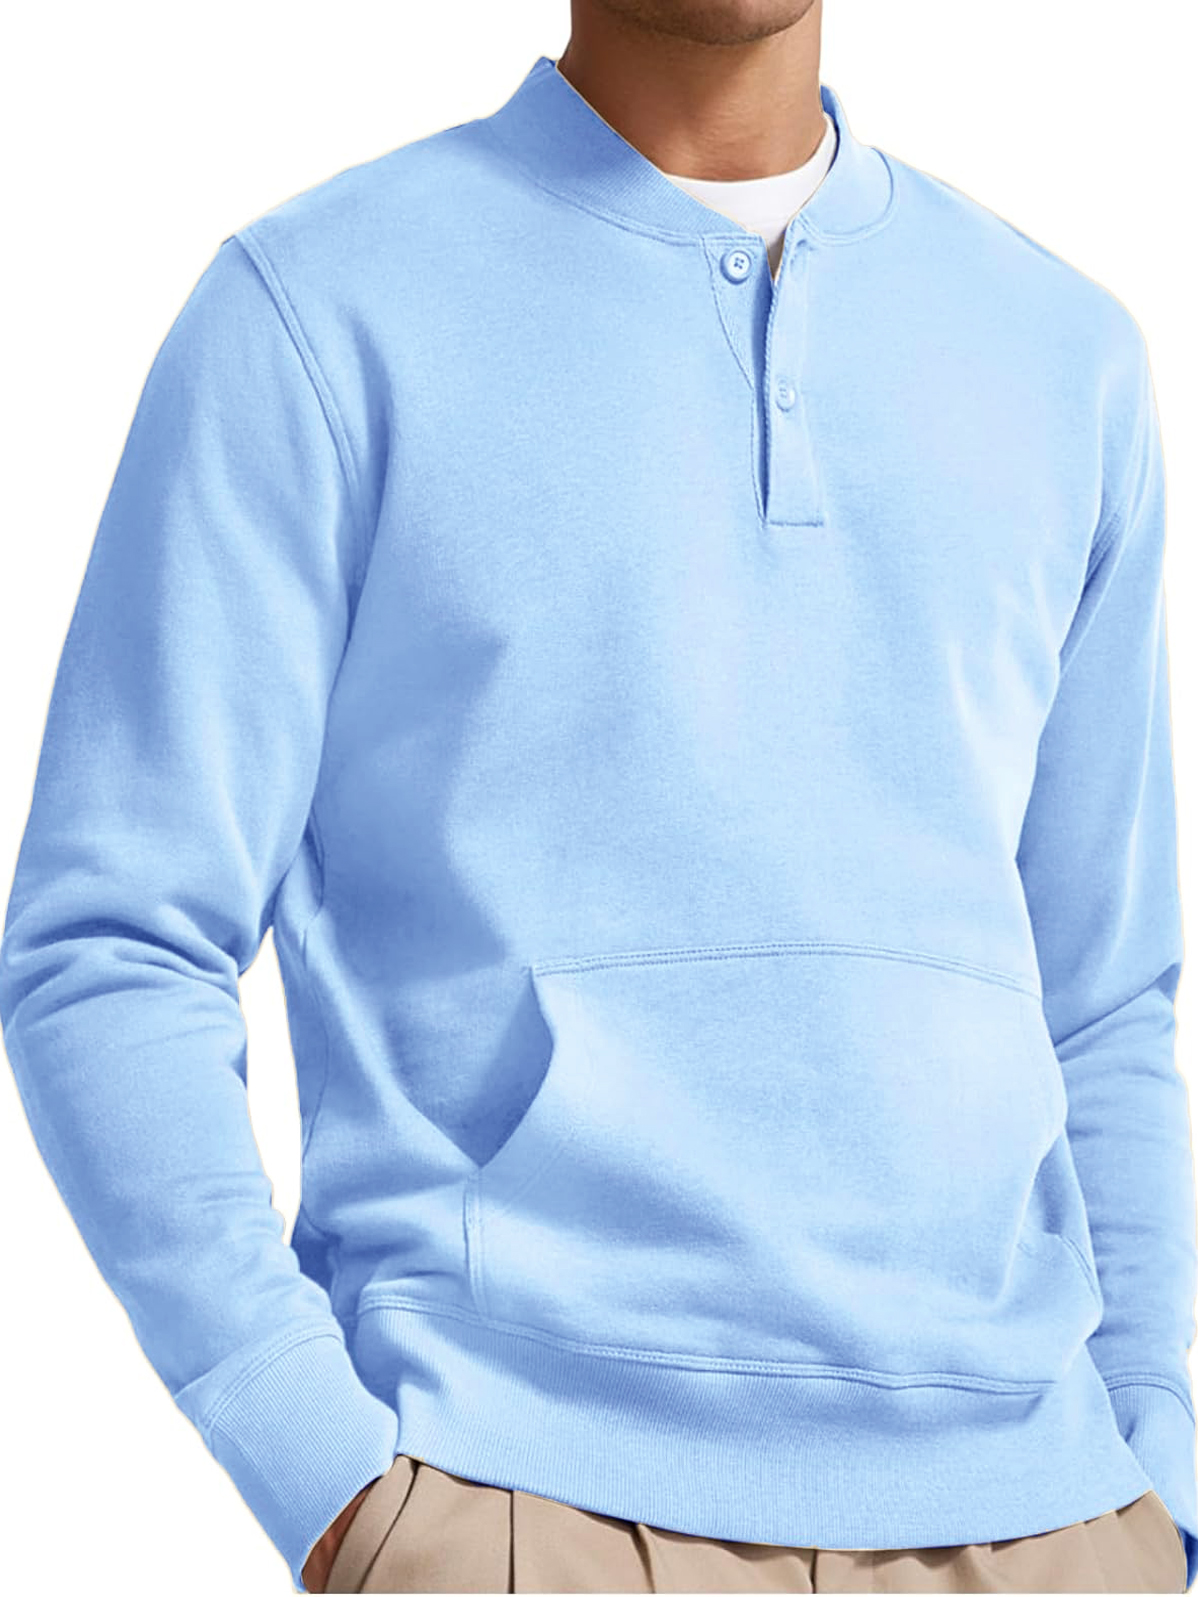 Men's Henley Casual Long Sleeve Warm Stylish Button Pocket Pullover Sweater